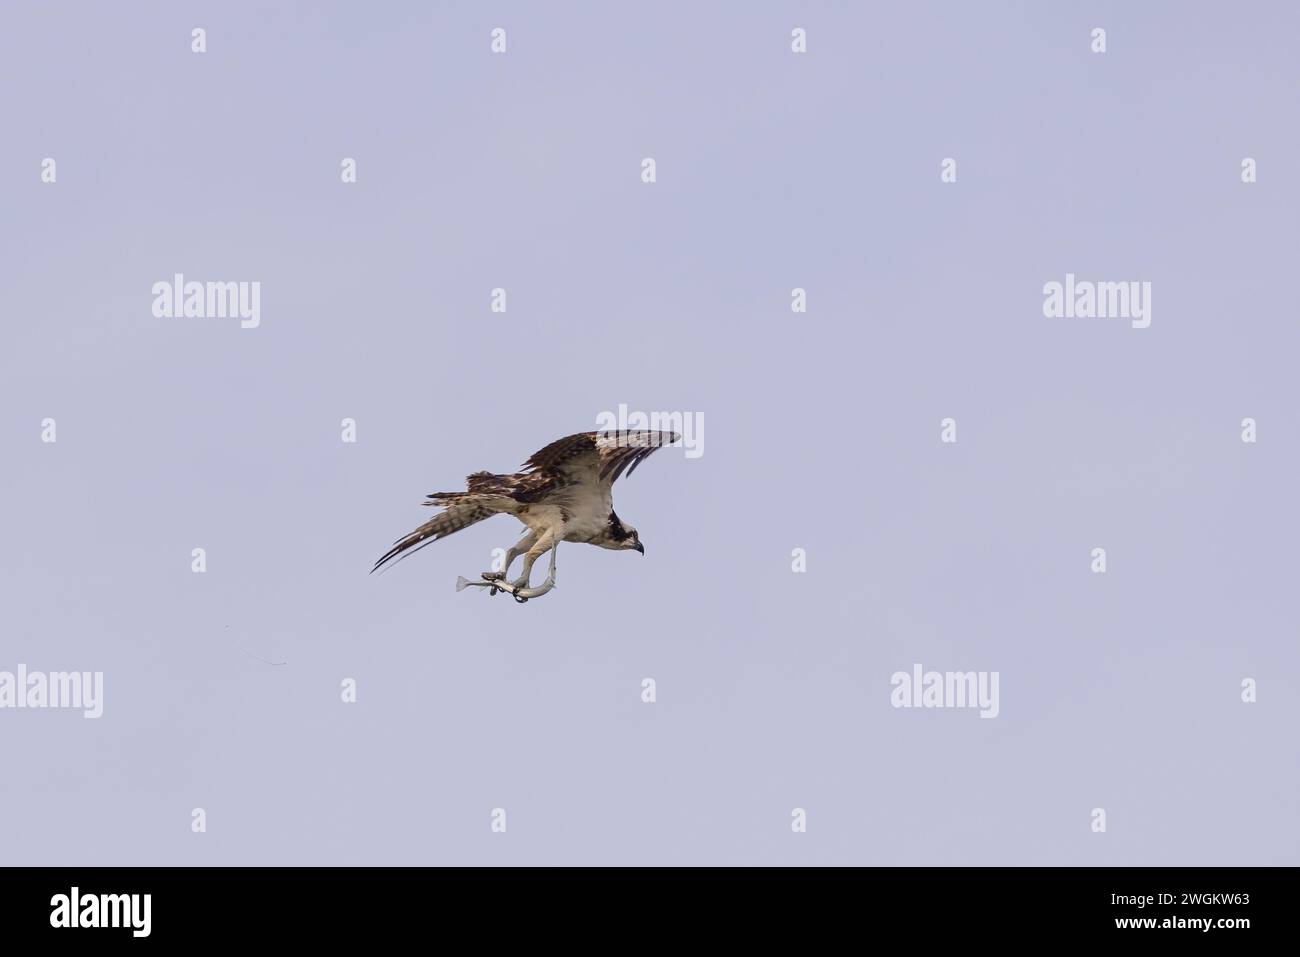 An osprey in flight with an Atlantic needlefish in its talons. Stock Photo